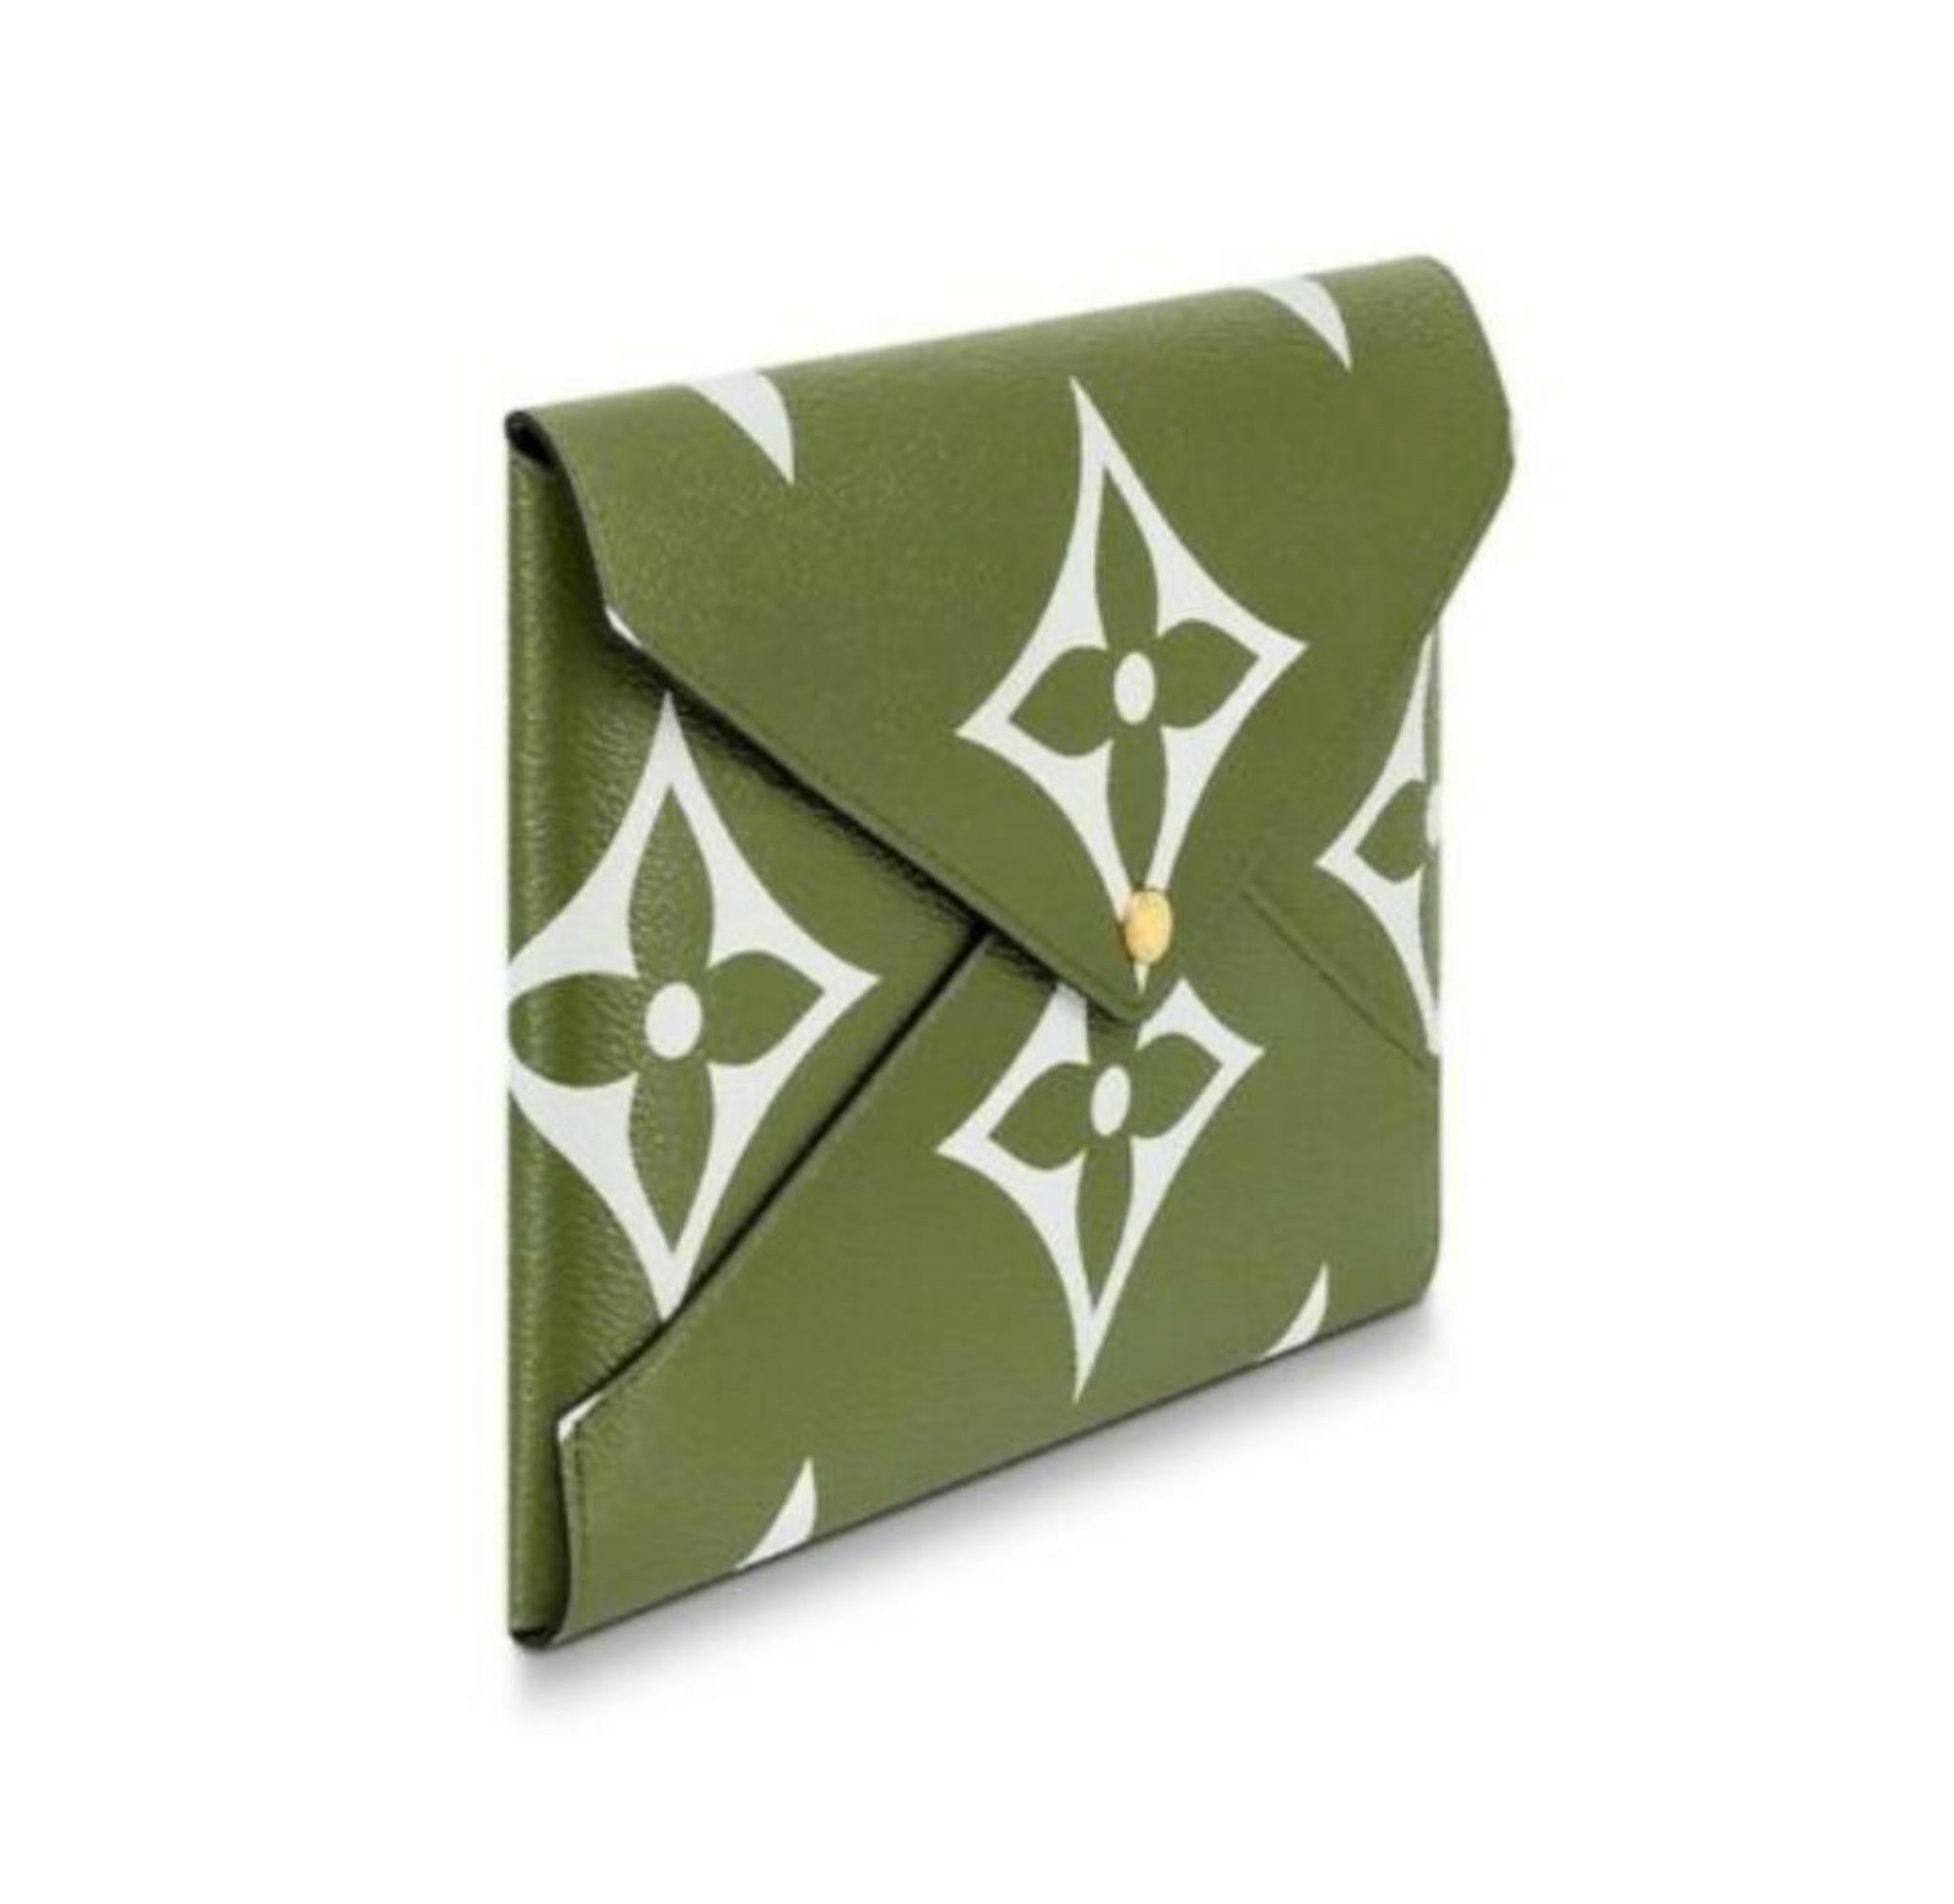 BRAND NEW
(N or 10/10)
Includes Dust Bag
Louis Vuitton
Country/Region of Manufacture:FranceProduct Line:Louis Vuitton Giant Monogram
Material:CanvasClosure:Flap, Snap
Color:
Green
Style:Clutch
Features:Monogram
Base Length: 9 in
Height: 6.25 in
SKU